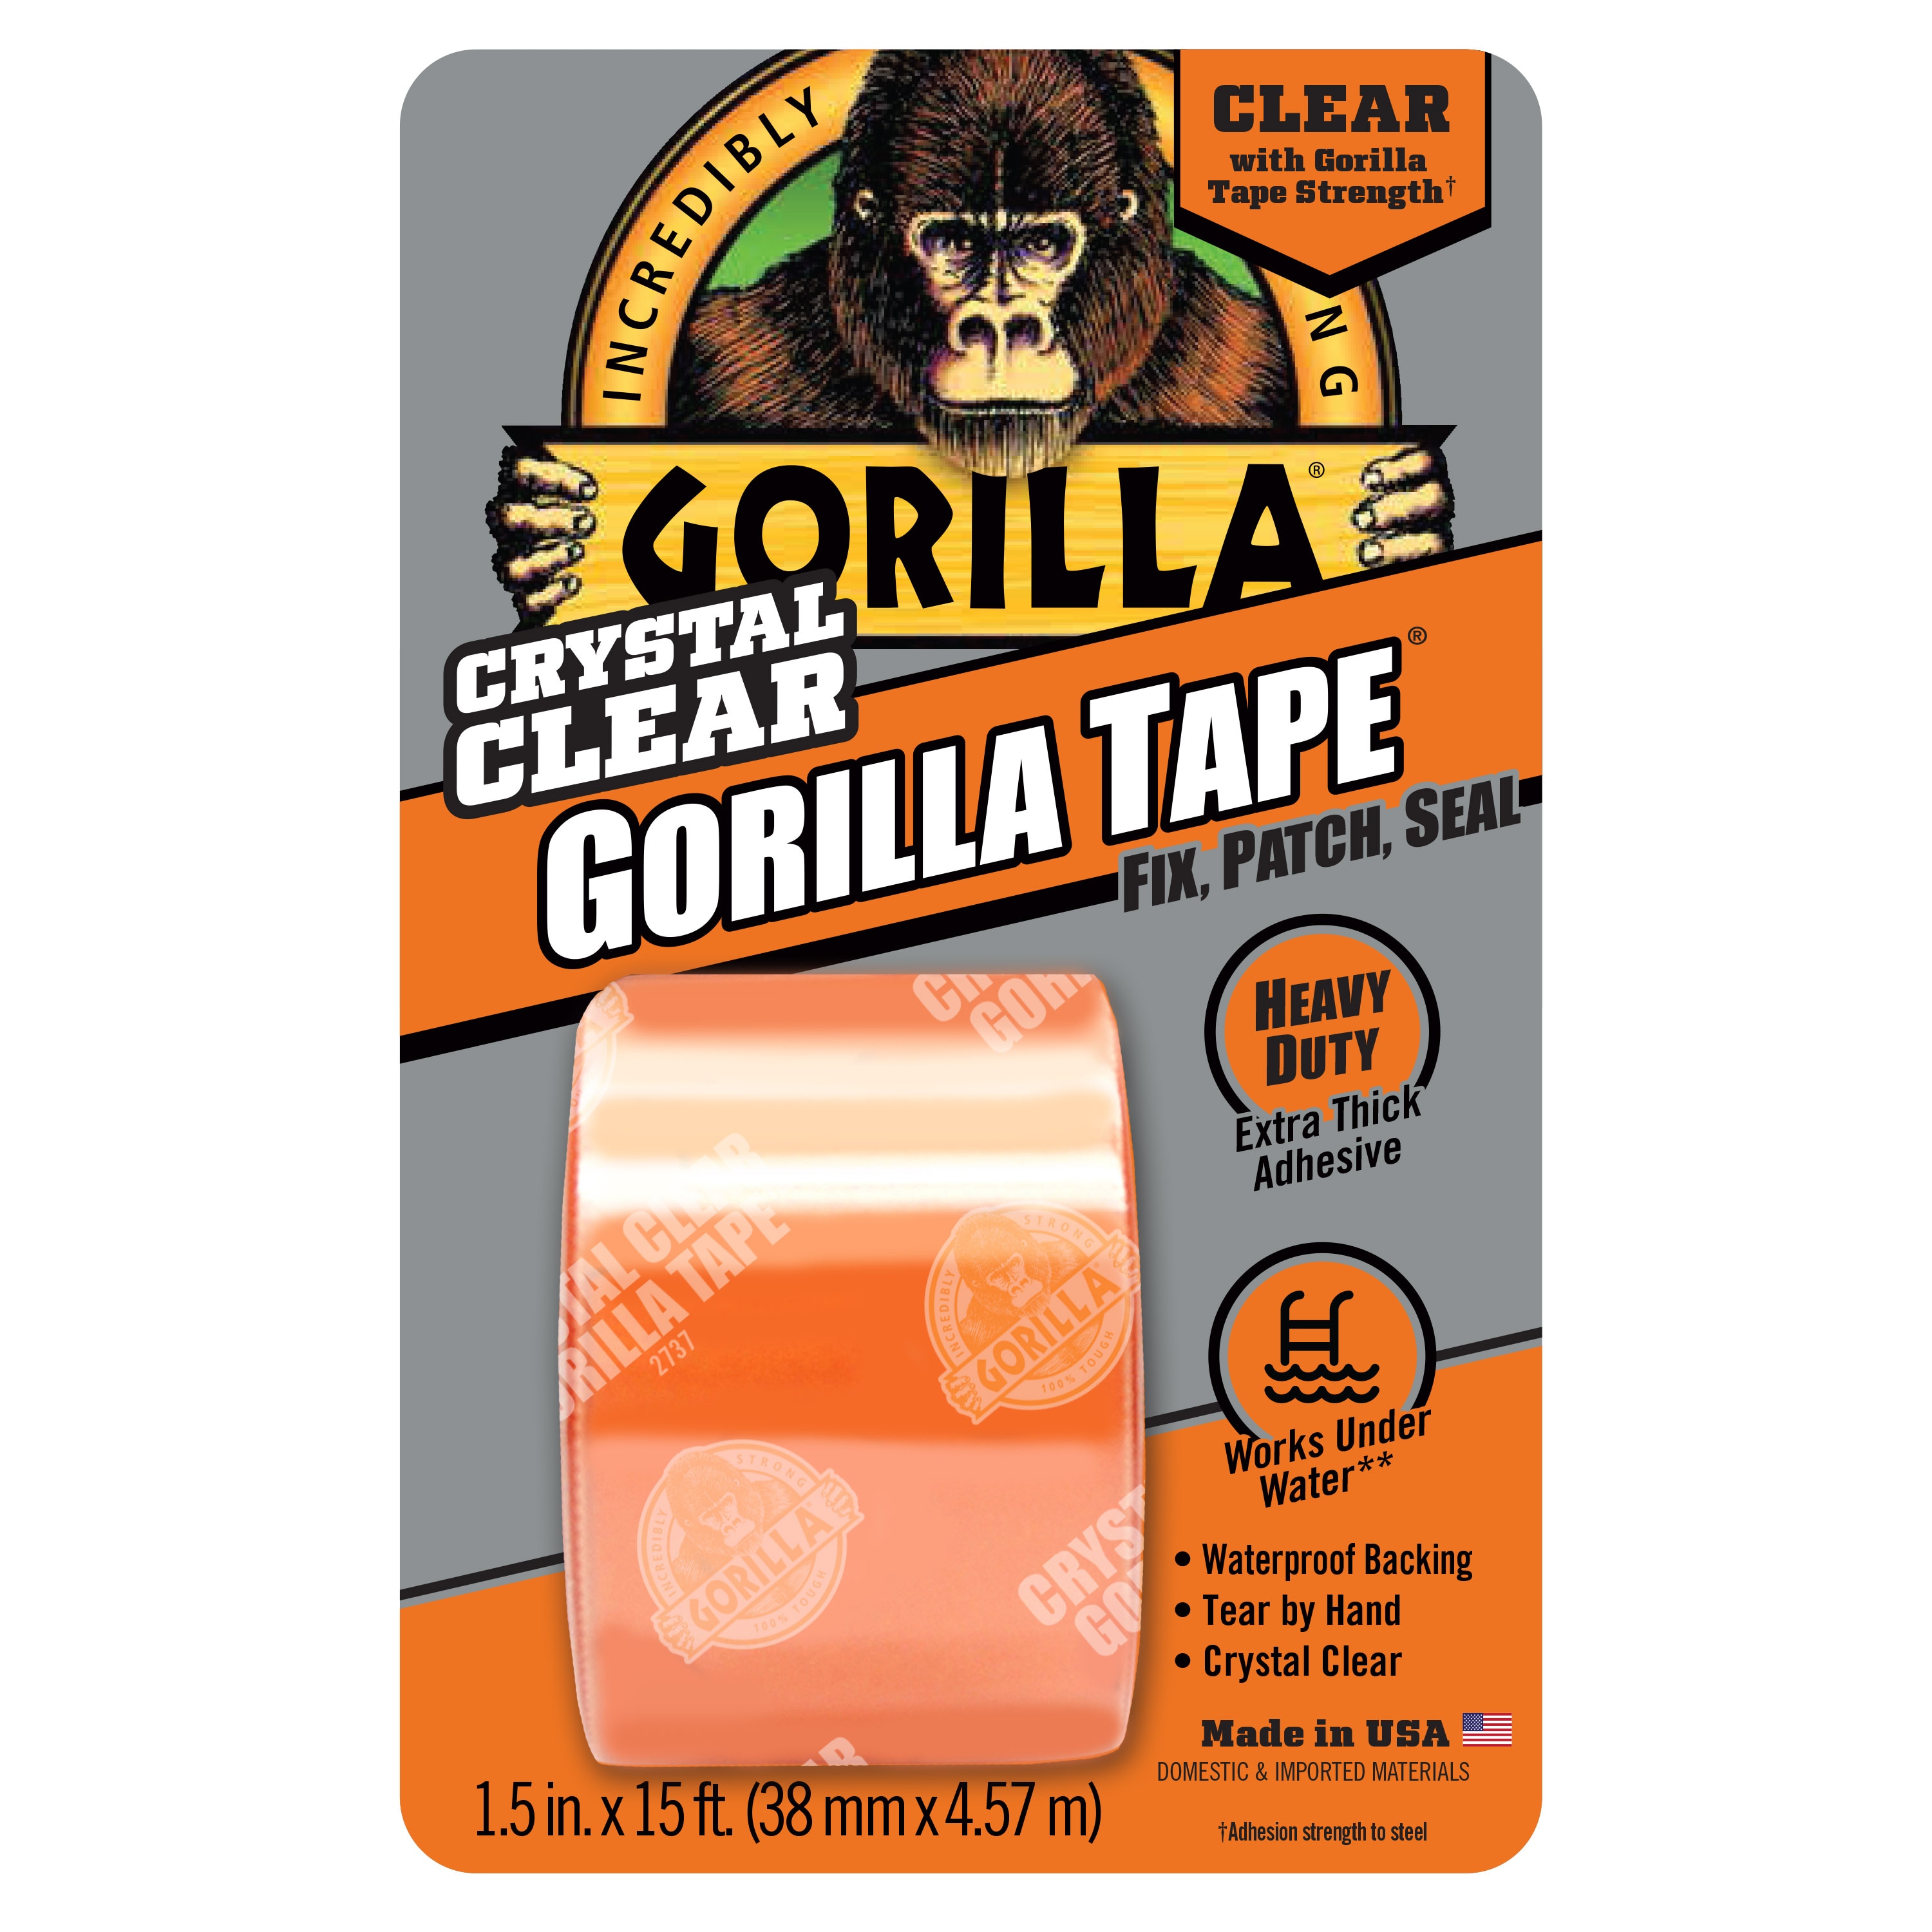 Gorilla Tough and Wide White Duct Tape 2.88-in x 25 Yard(s)